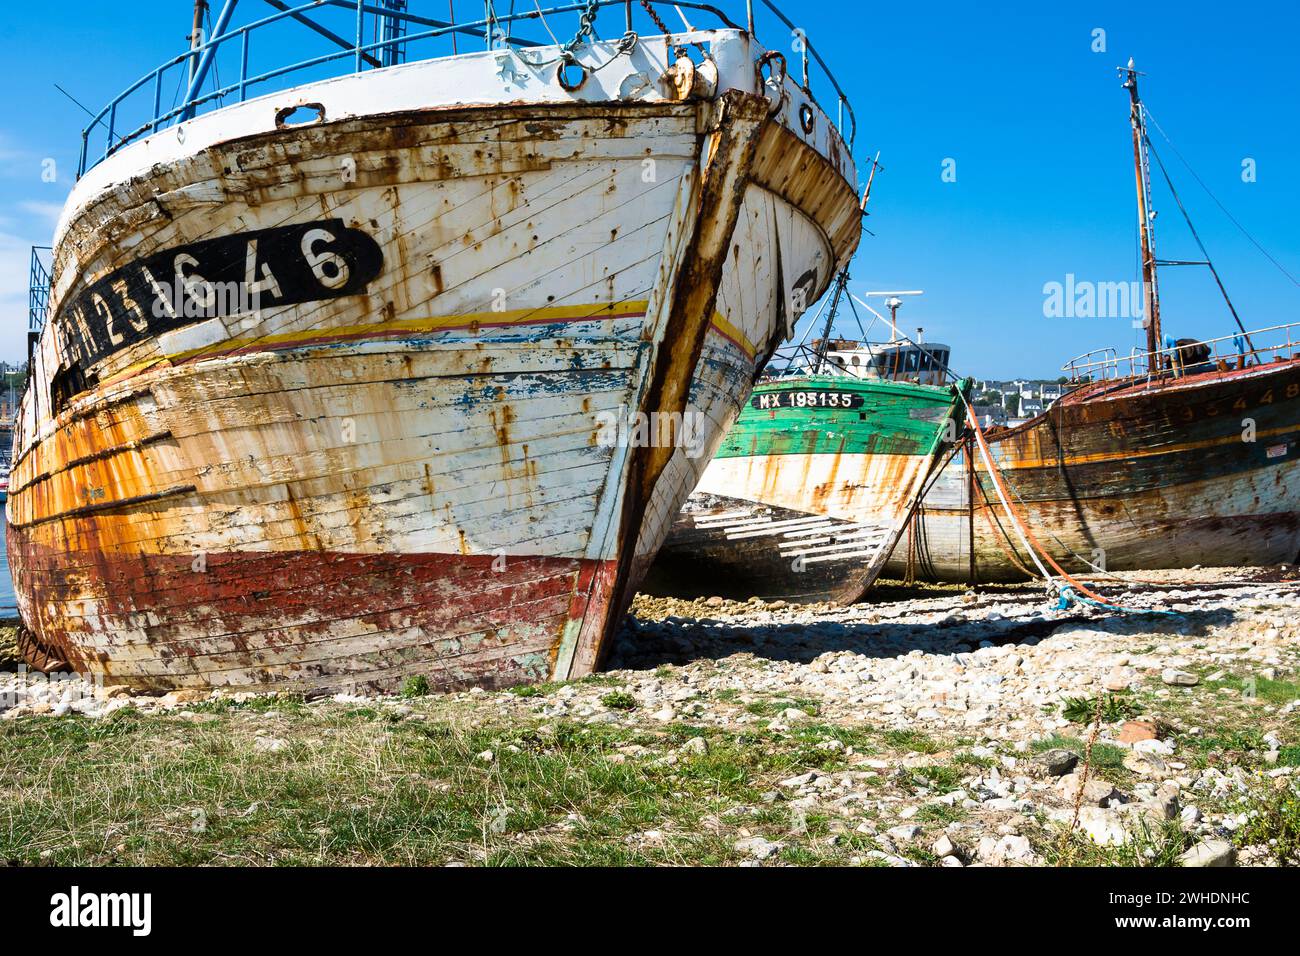 Shipwrack in Camaret-sur-mer in the south of france Stock Photo